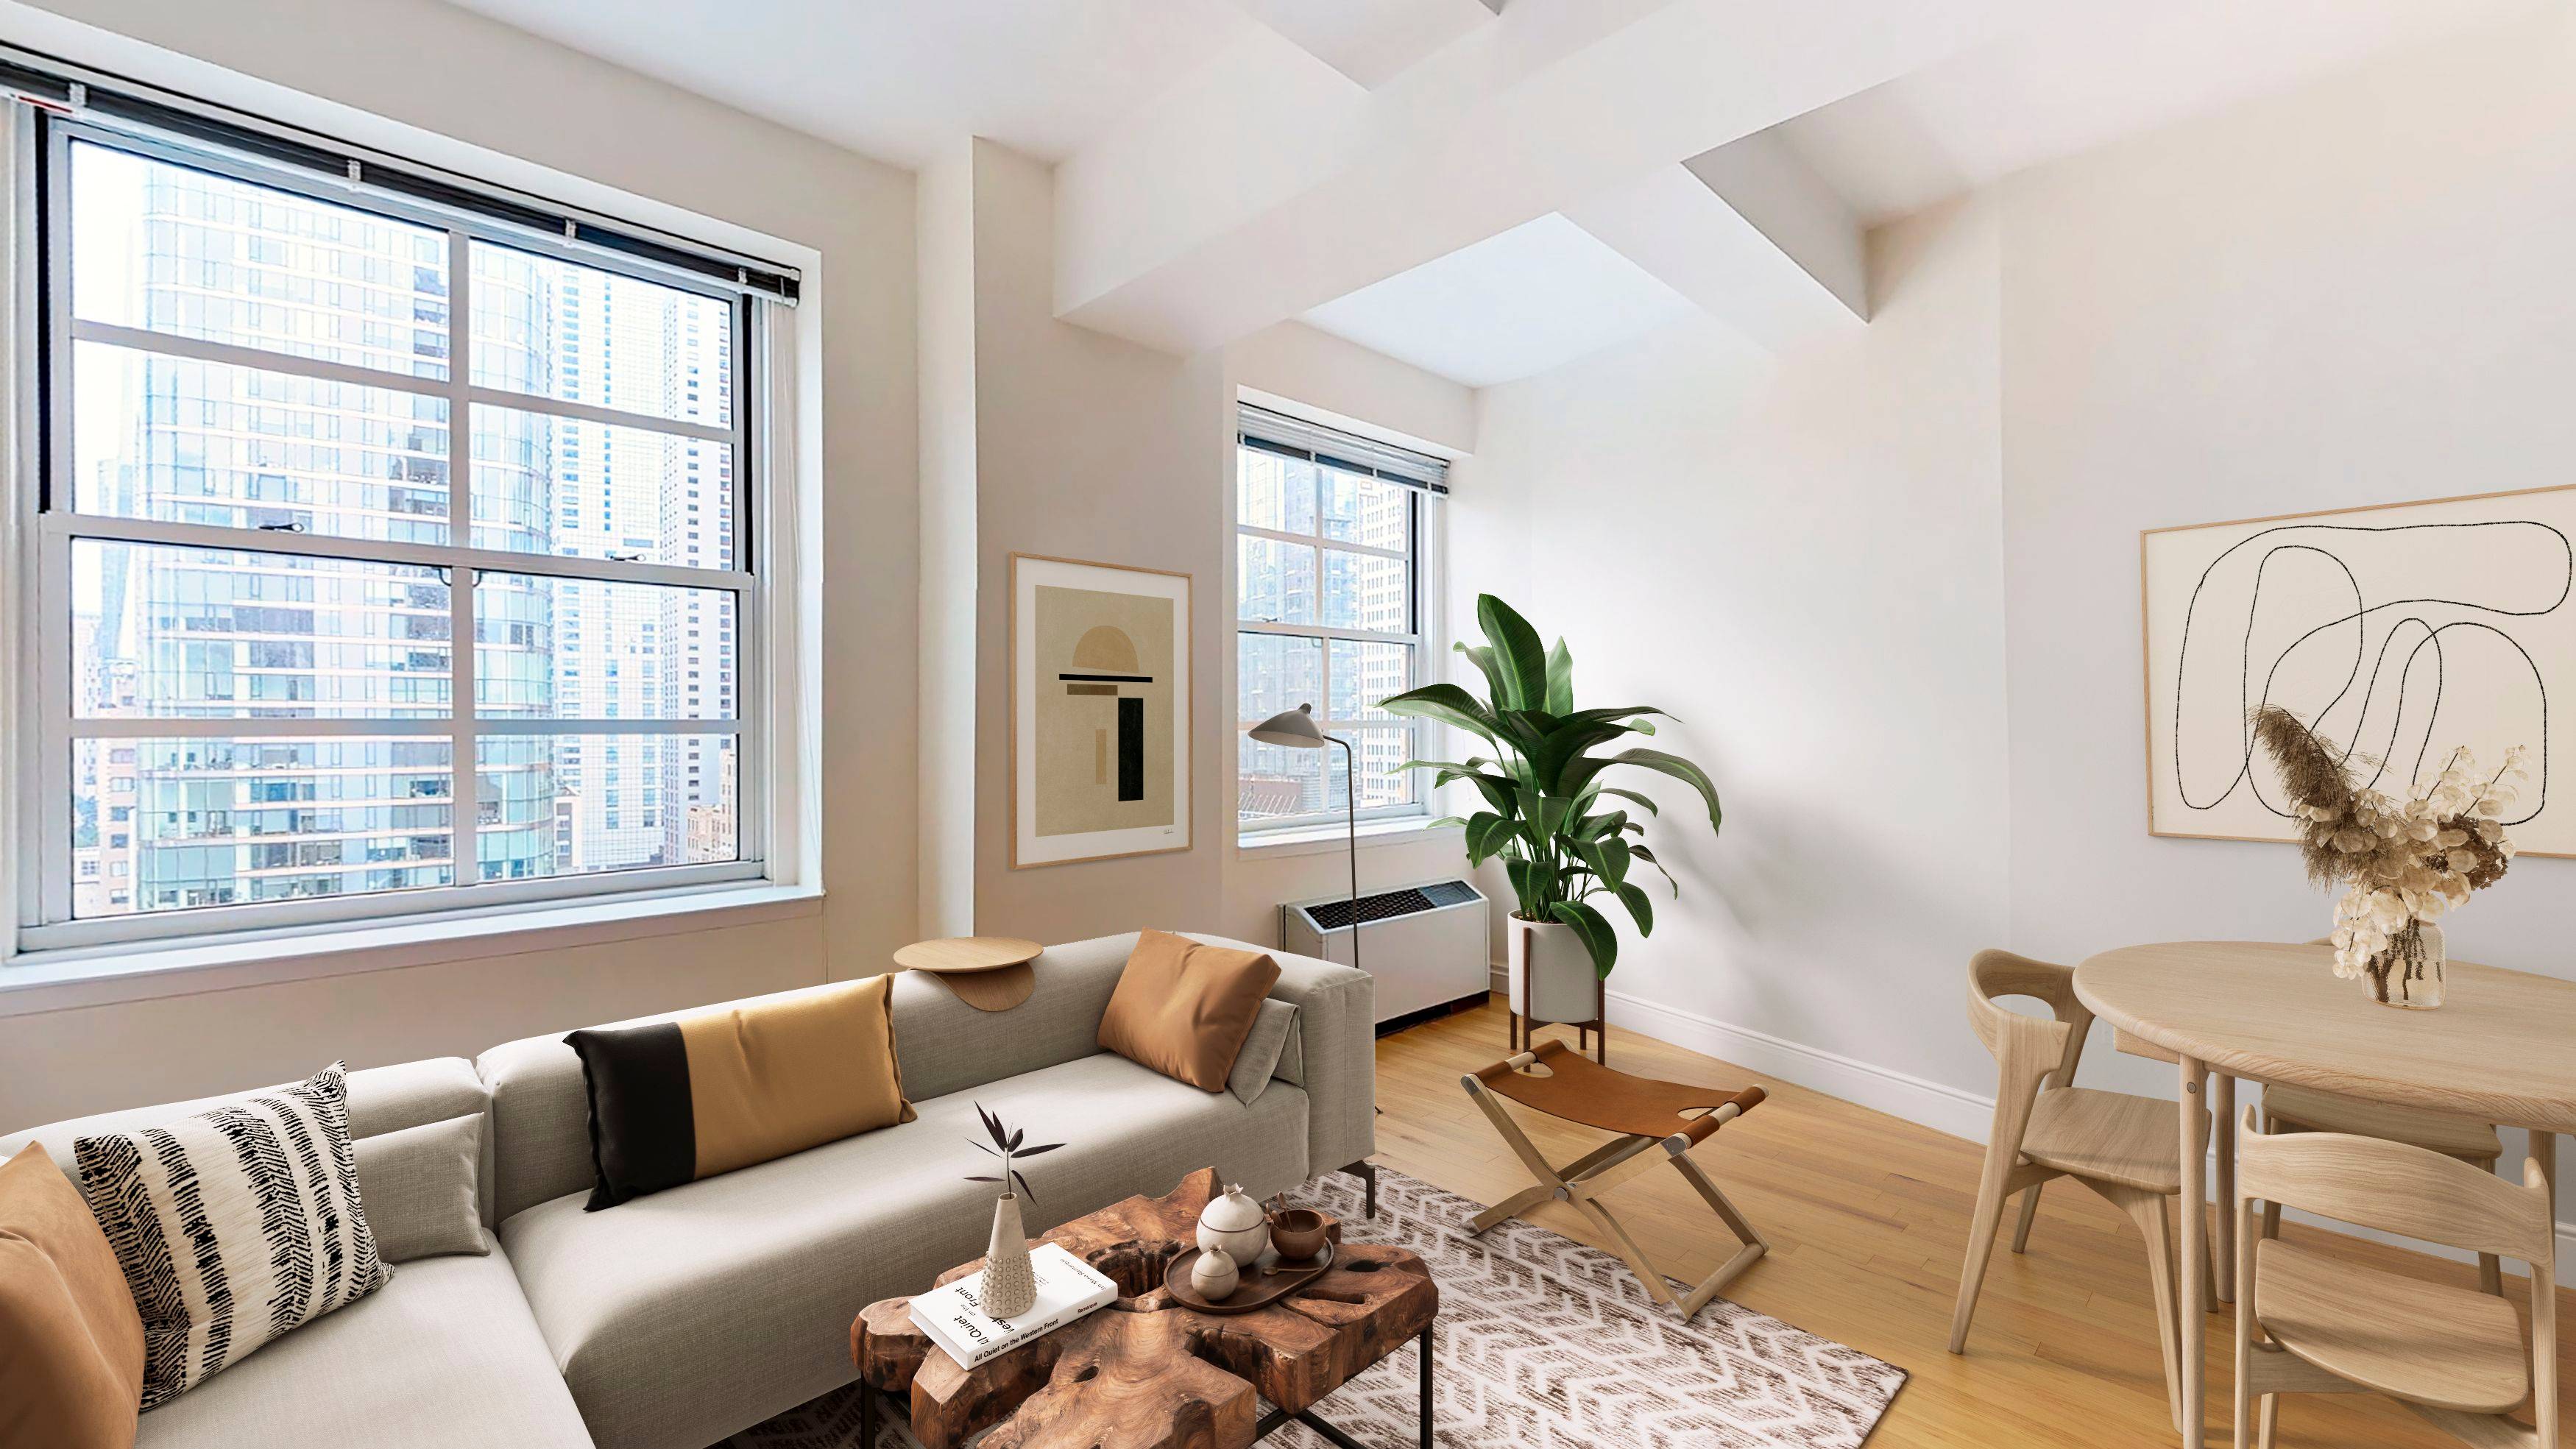 This extra large studio features a separate sleeping alcove, a pass through kitchen with stainless steel appliances, and two over sized windows with open city views.